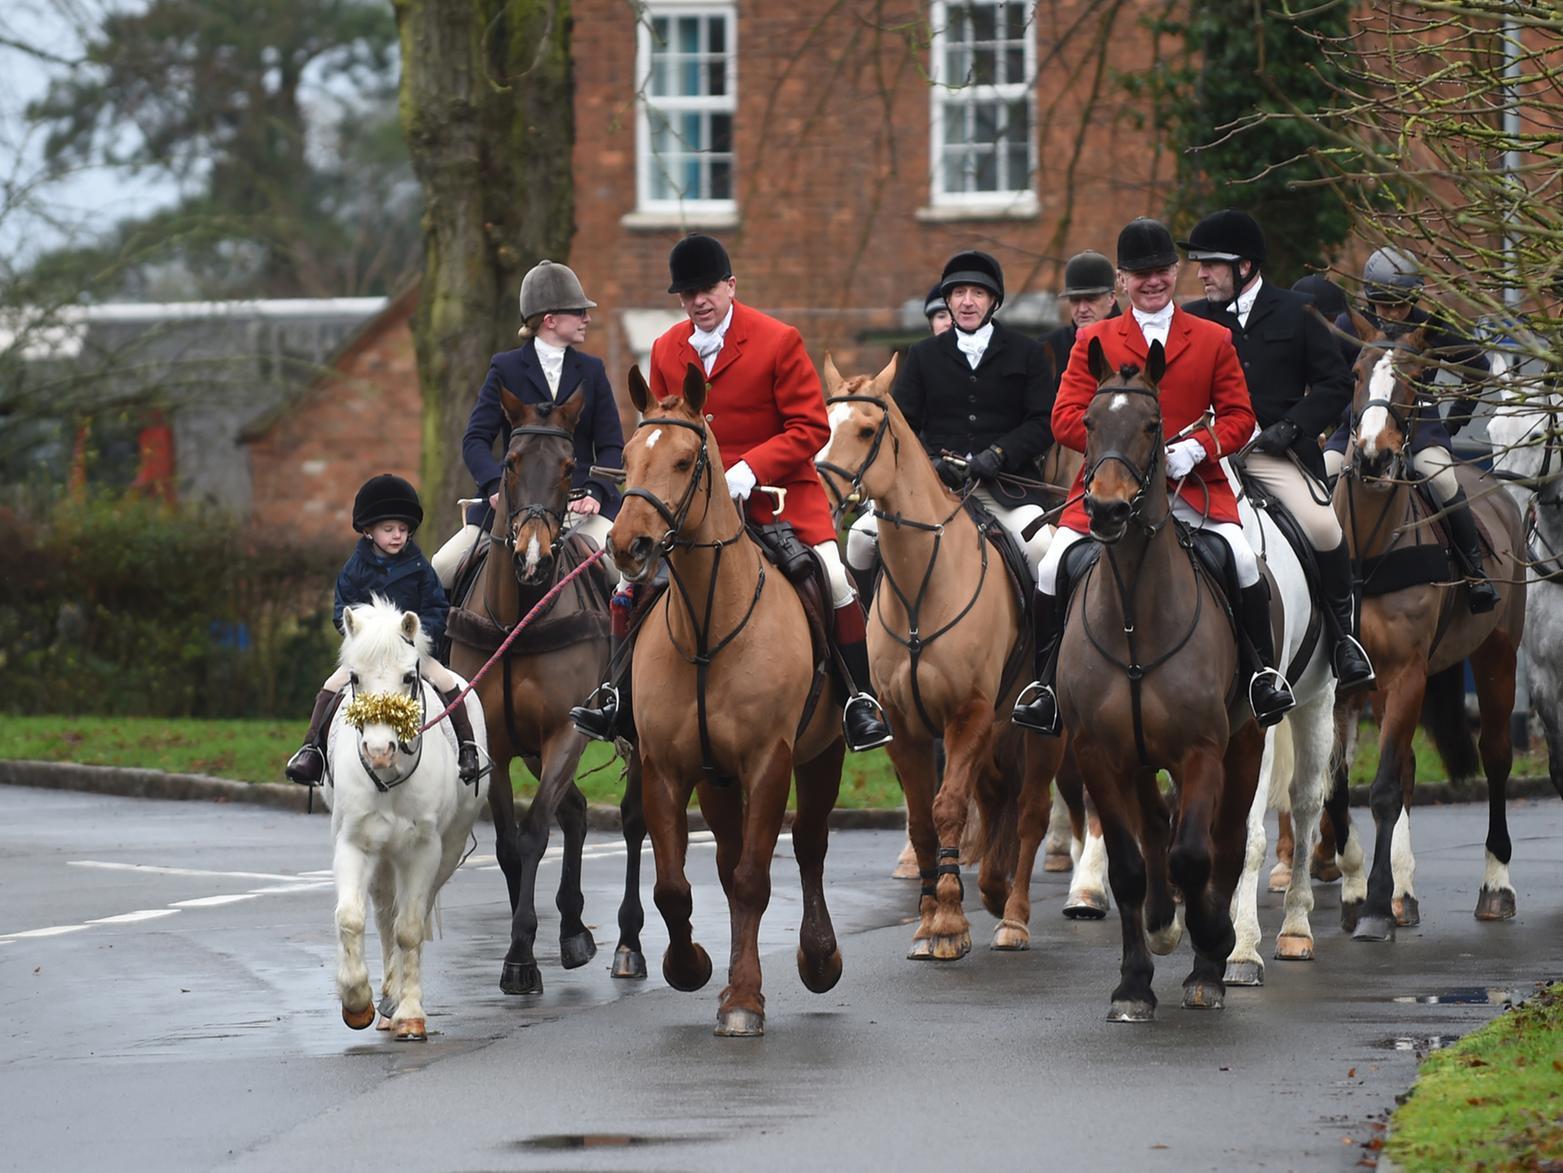 Fernie Hunt head to the Green in Great Bowden during Boxing Day.